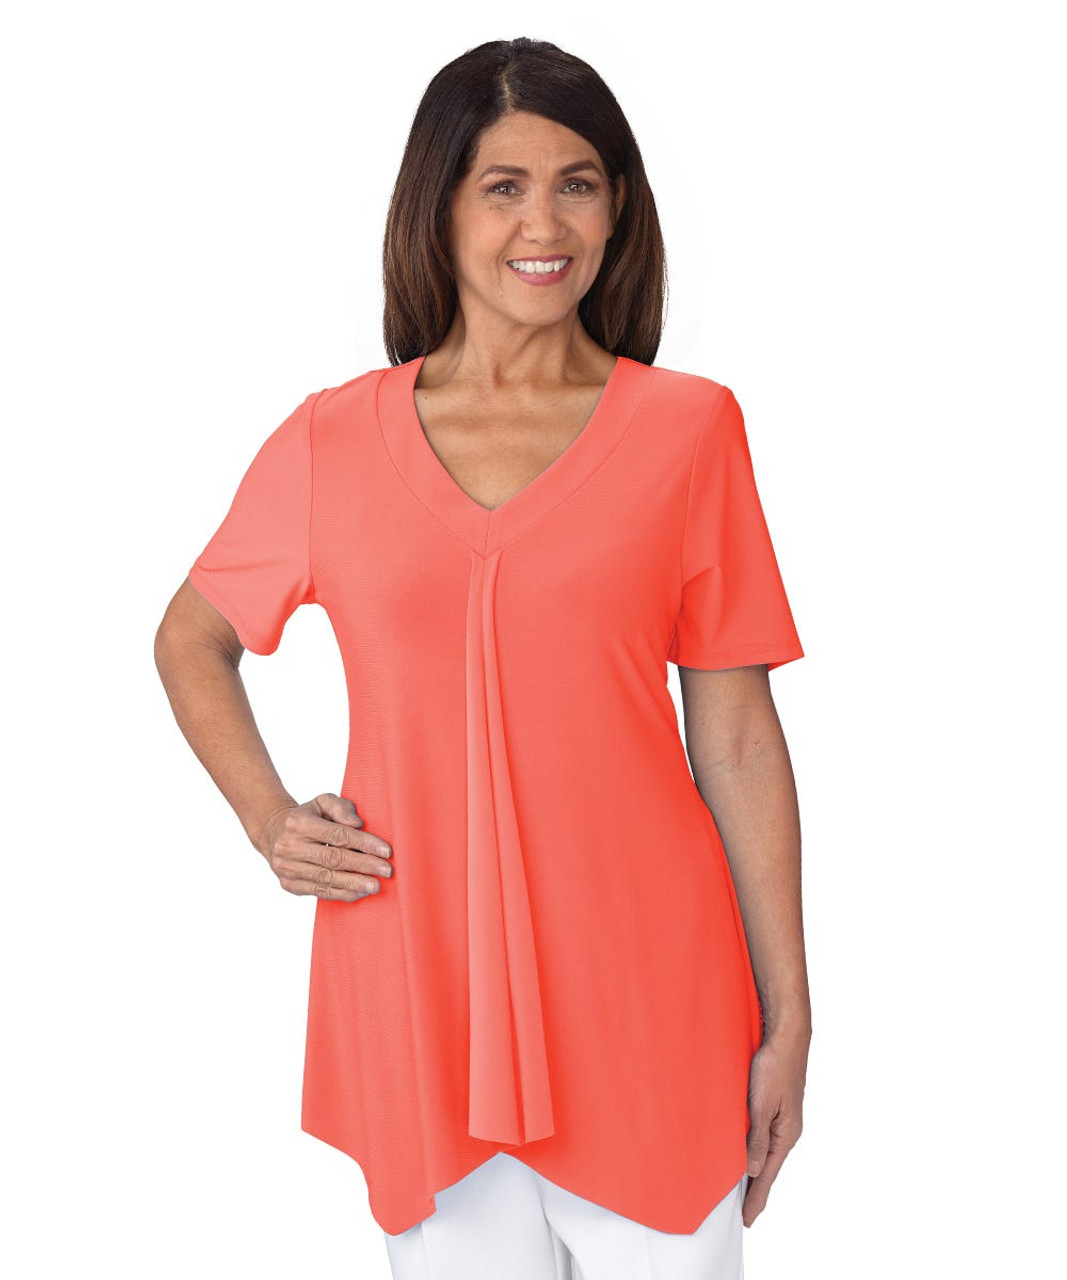 Silverts SV41120 Women's Easy Self Dressing Fashion Top Great for Arthritis Living Coral, Size=XL, SV41120-SV1344-XL